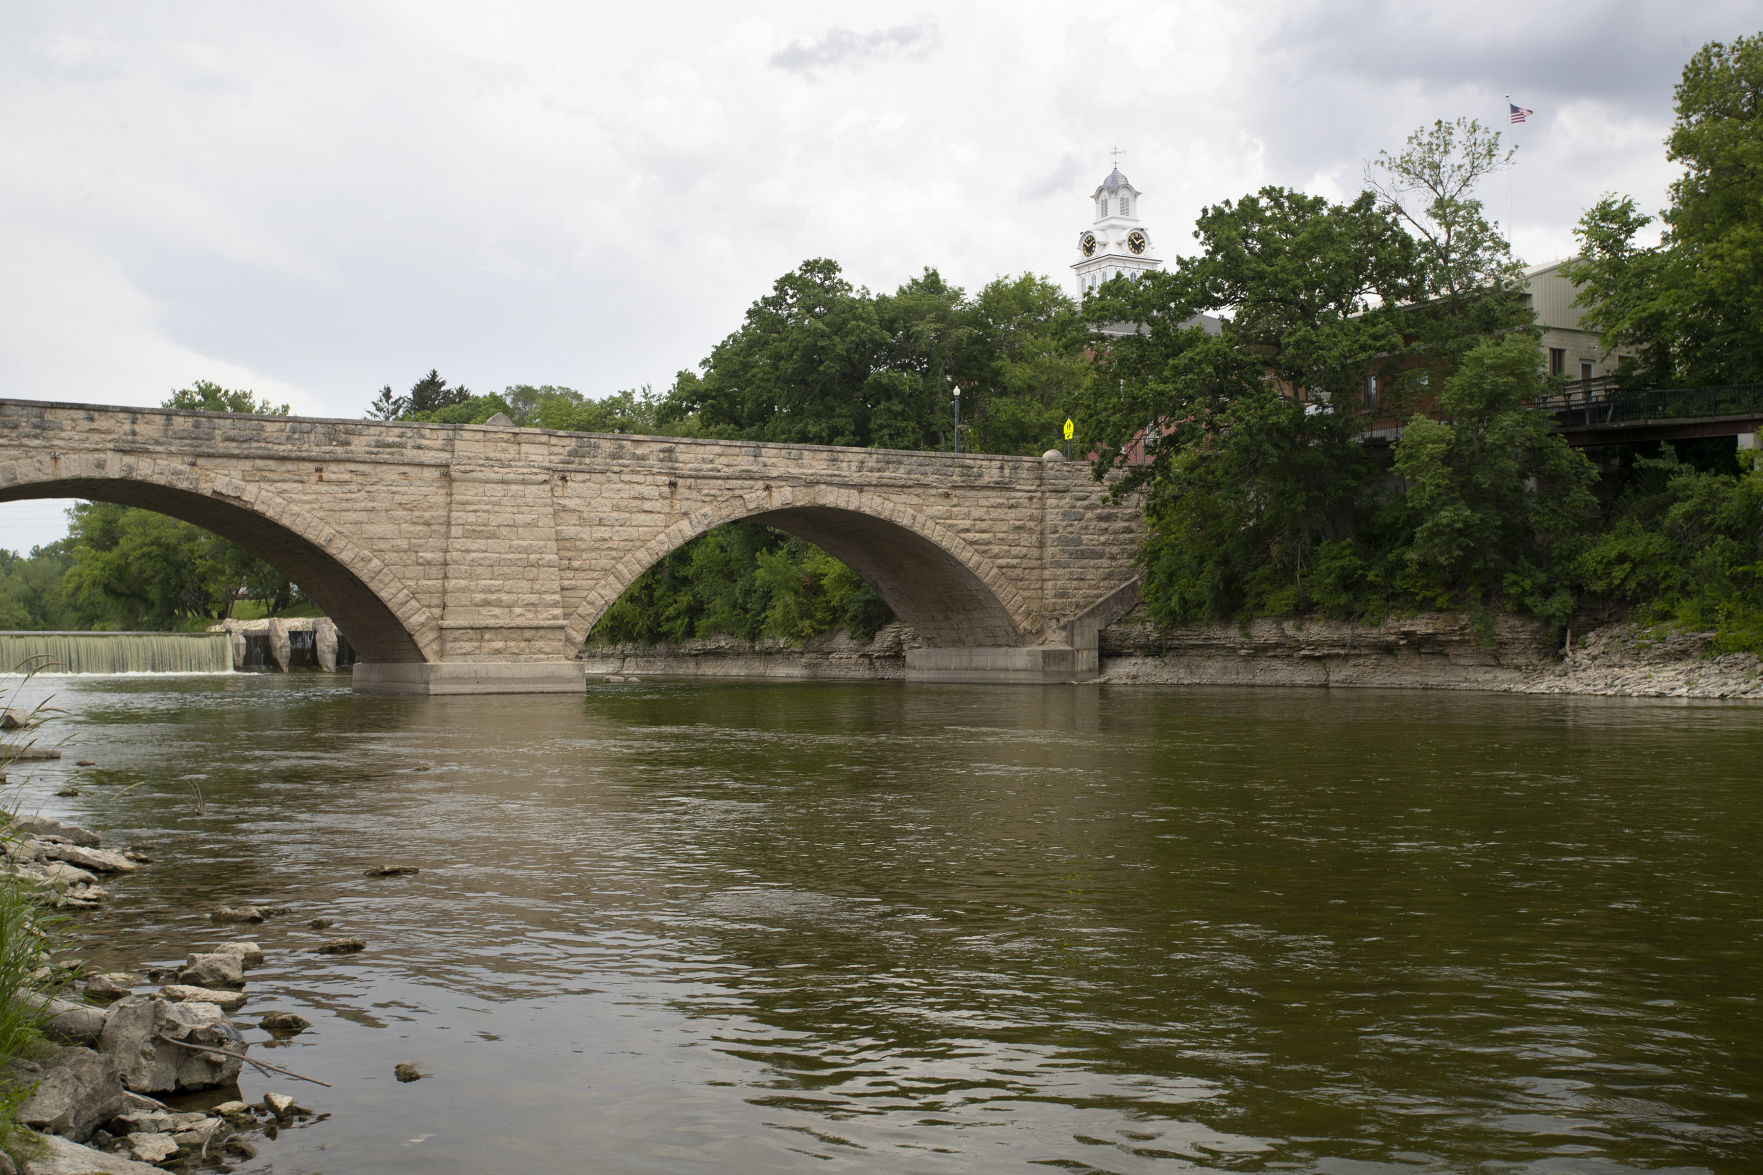 The Clayton County Courthouse and historic keystone arch bridge in Elkader, Iowa. Elkader will be celebrating its 175th Anniversary and Founders Day Celebration on Saturday, June 19.    PHOTO CREDIT: Stephen Gassman